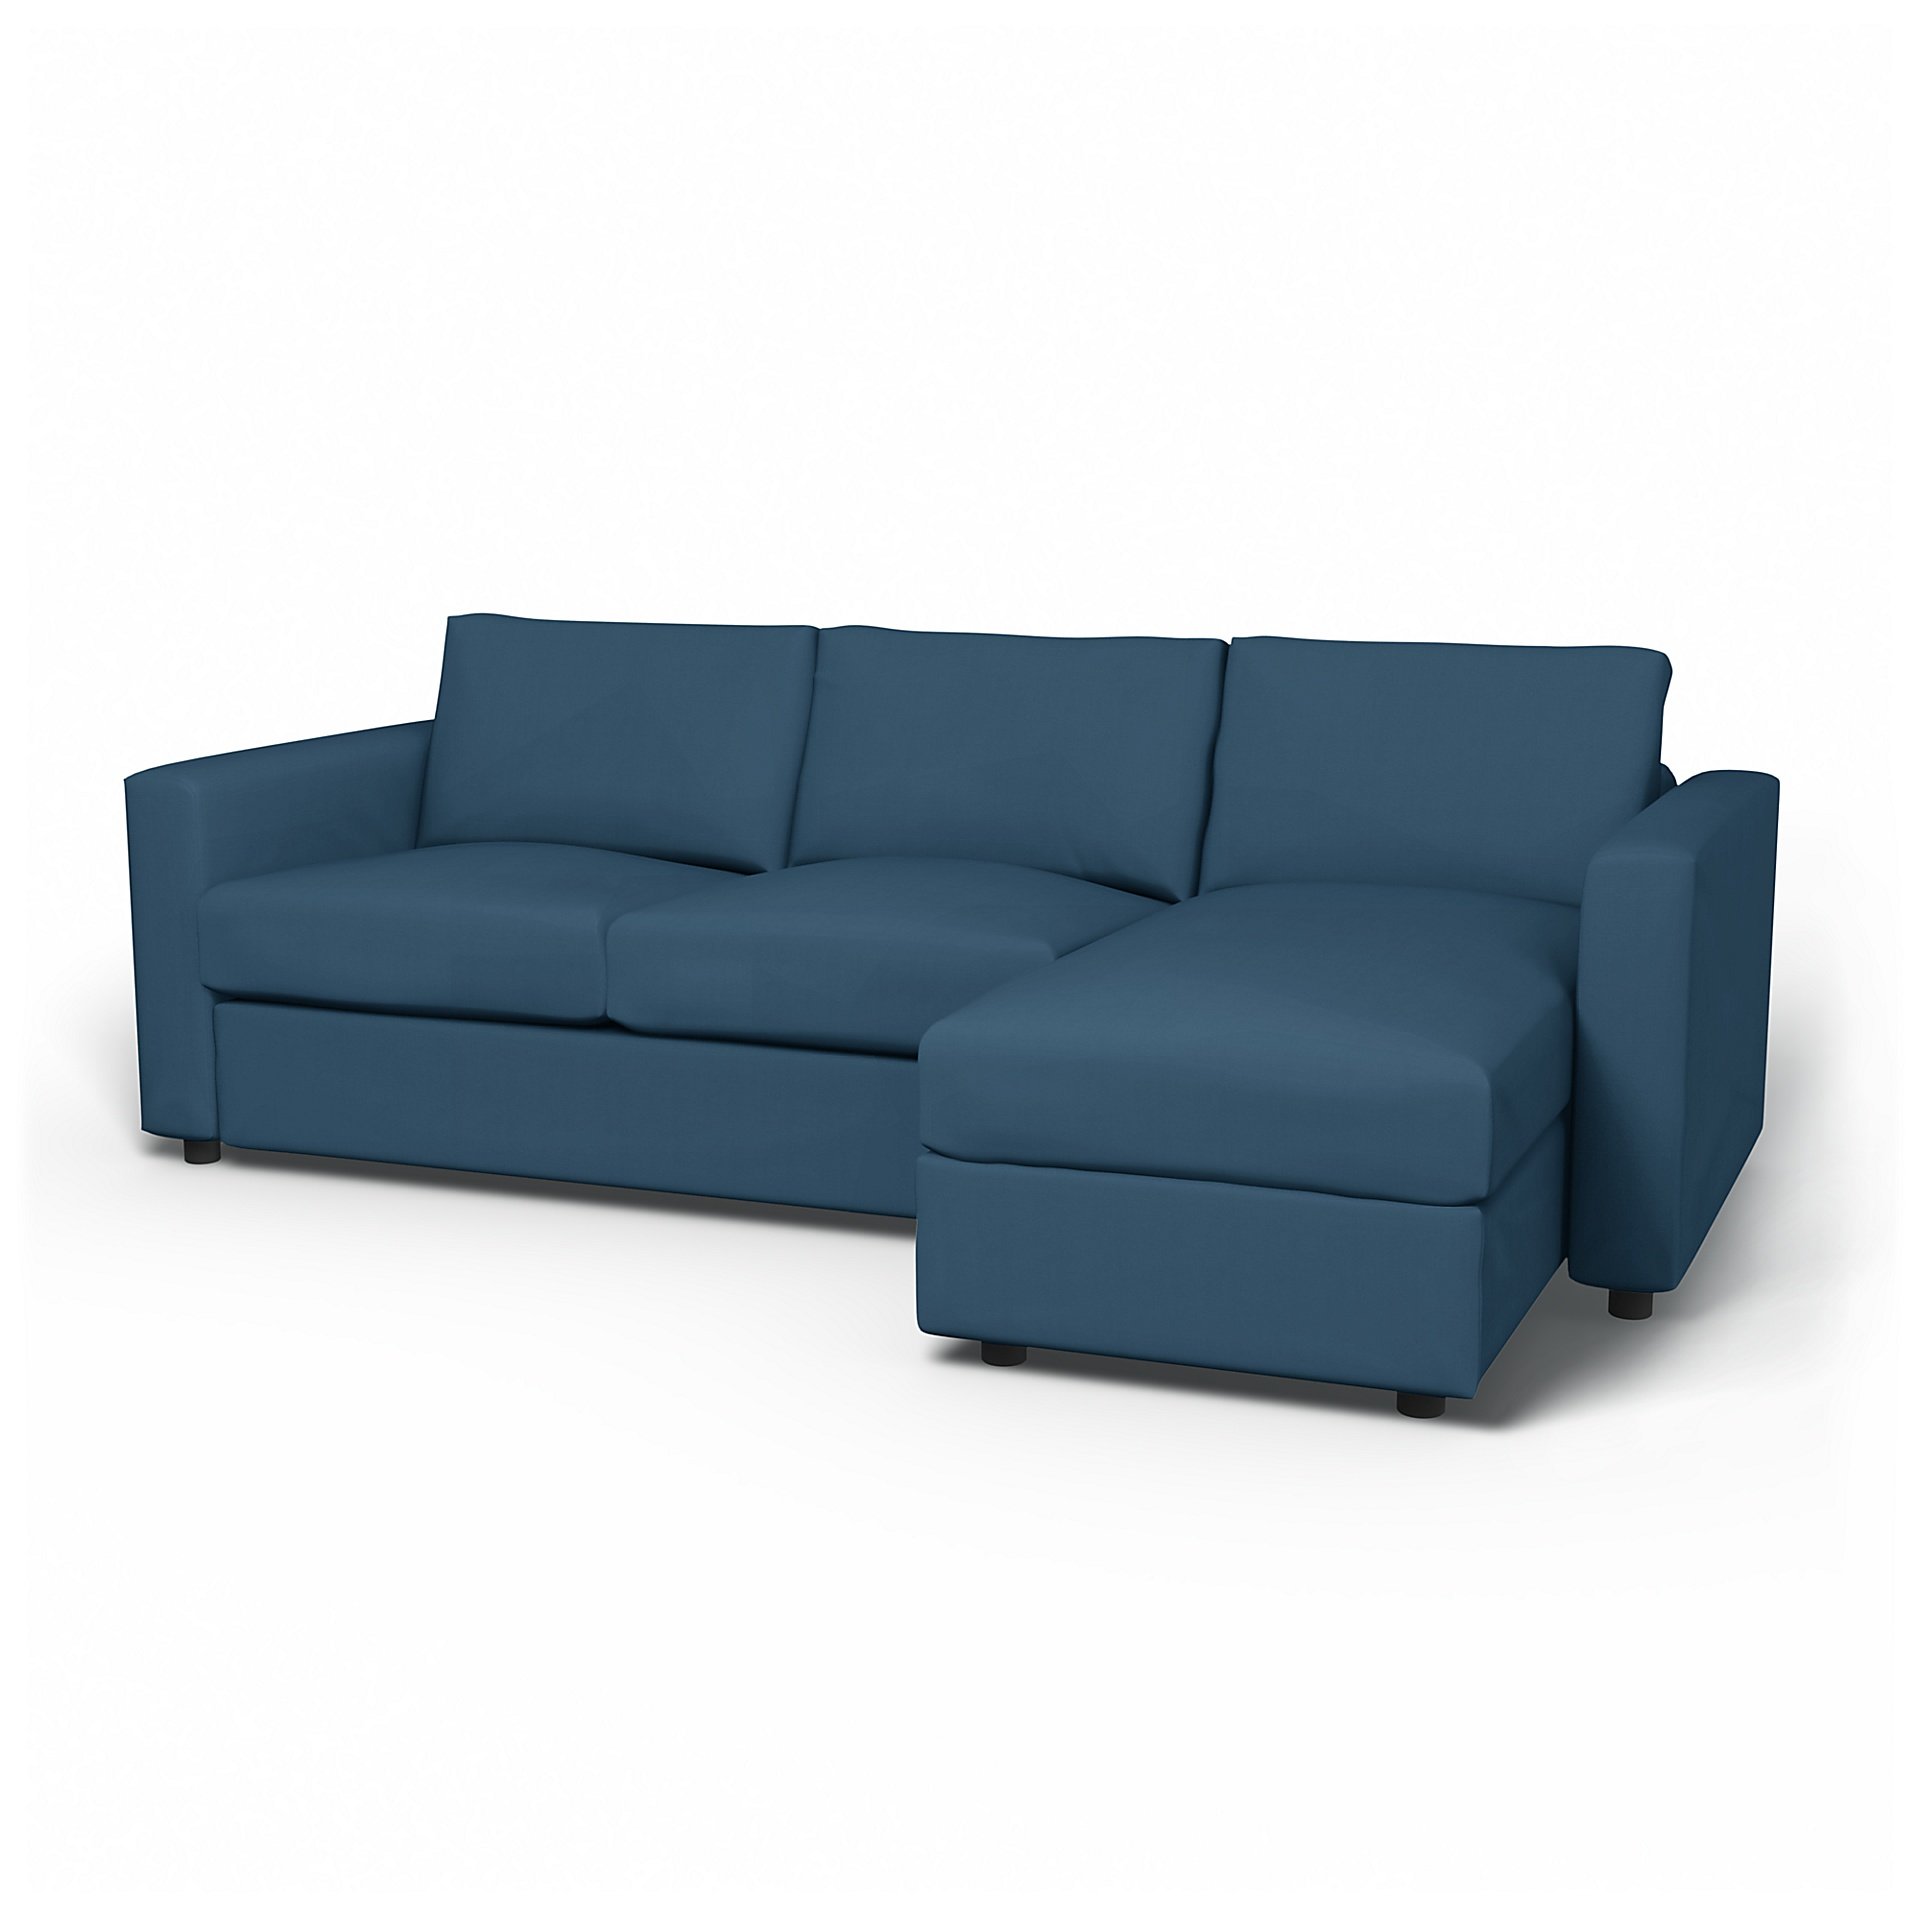 IKEA - Vimle 2 Seater Sofa with Chaise Cover, Real Teal, Cotton - Bemz